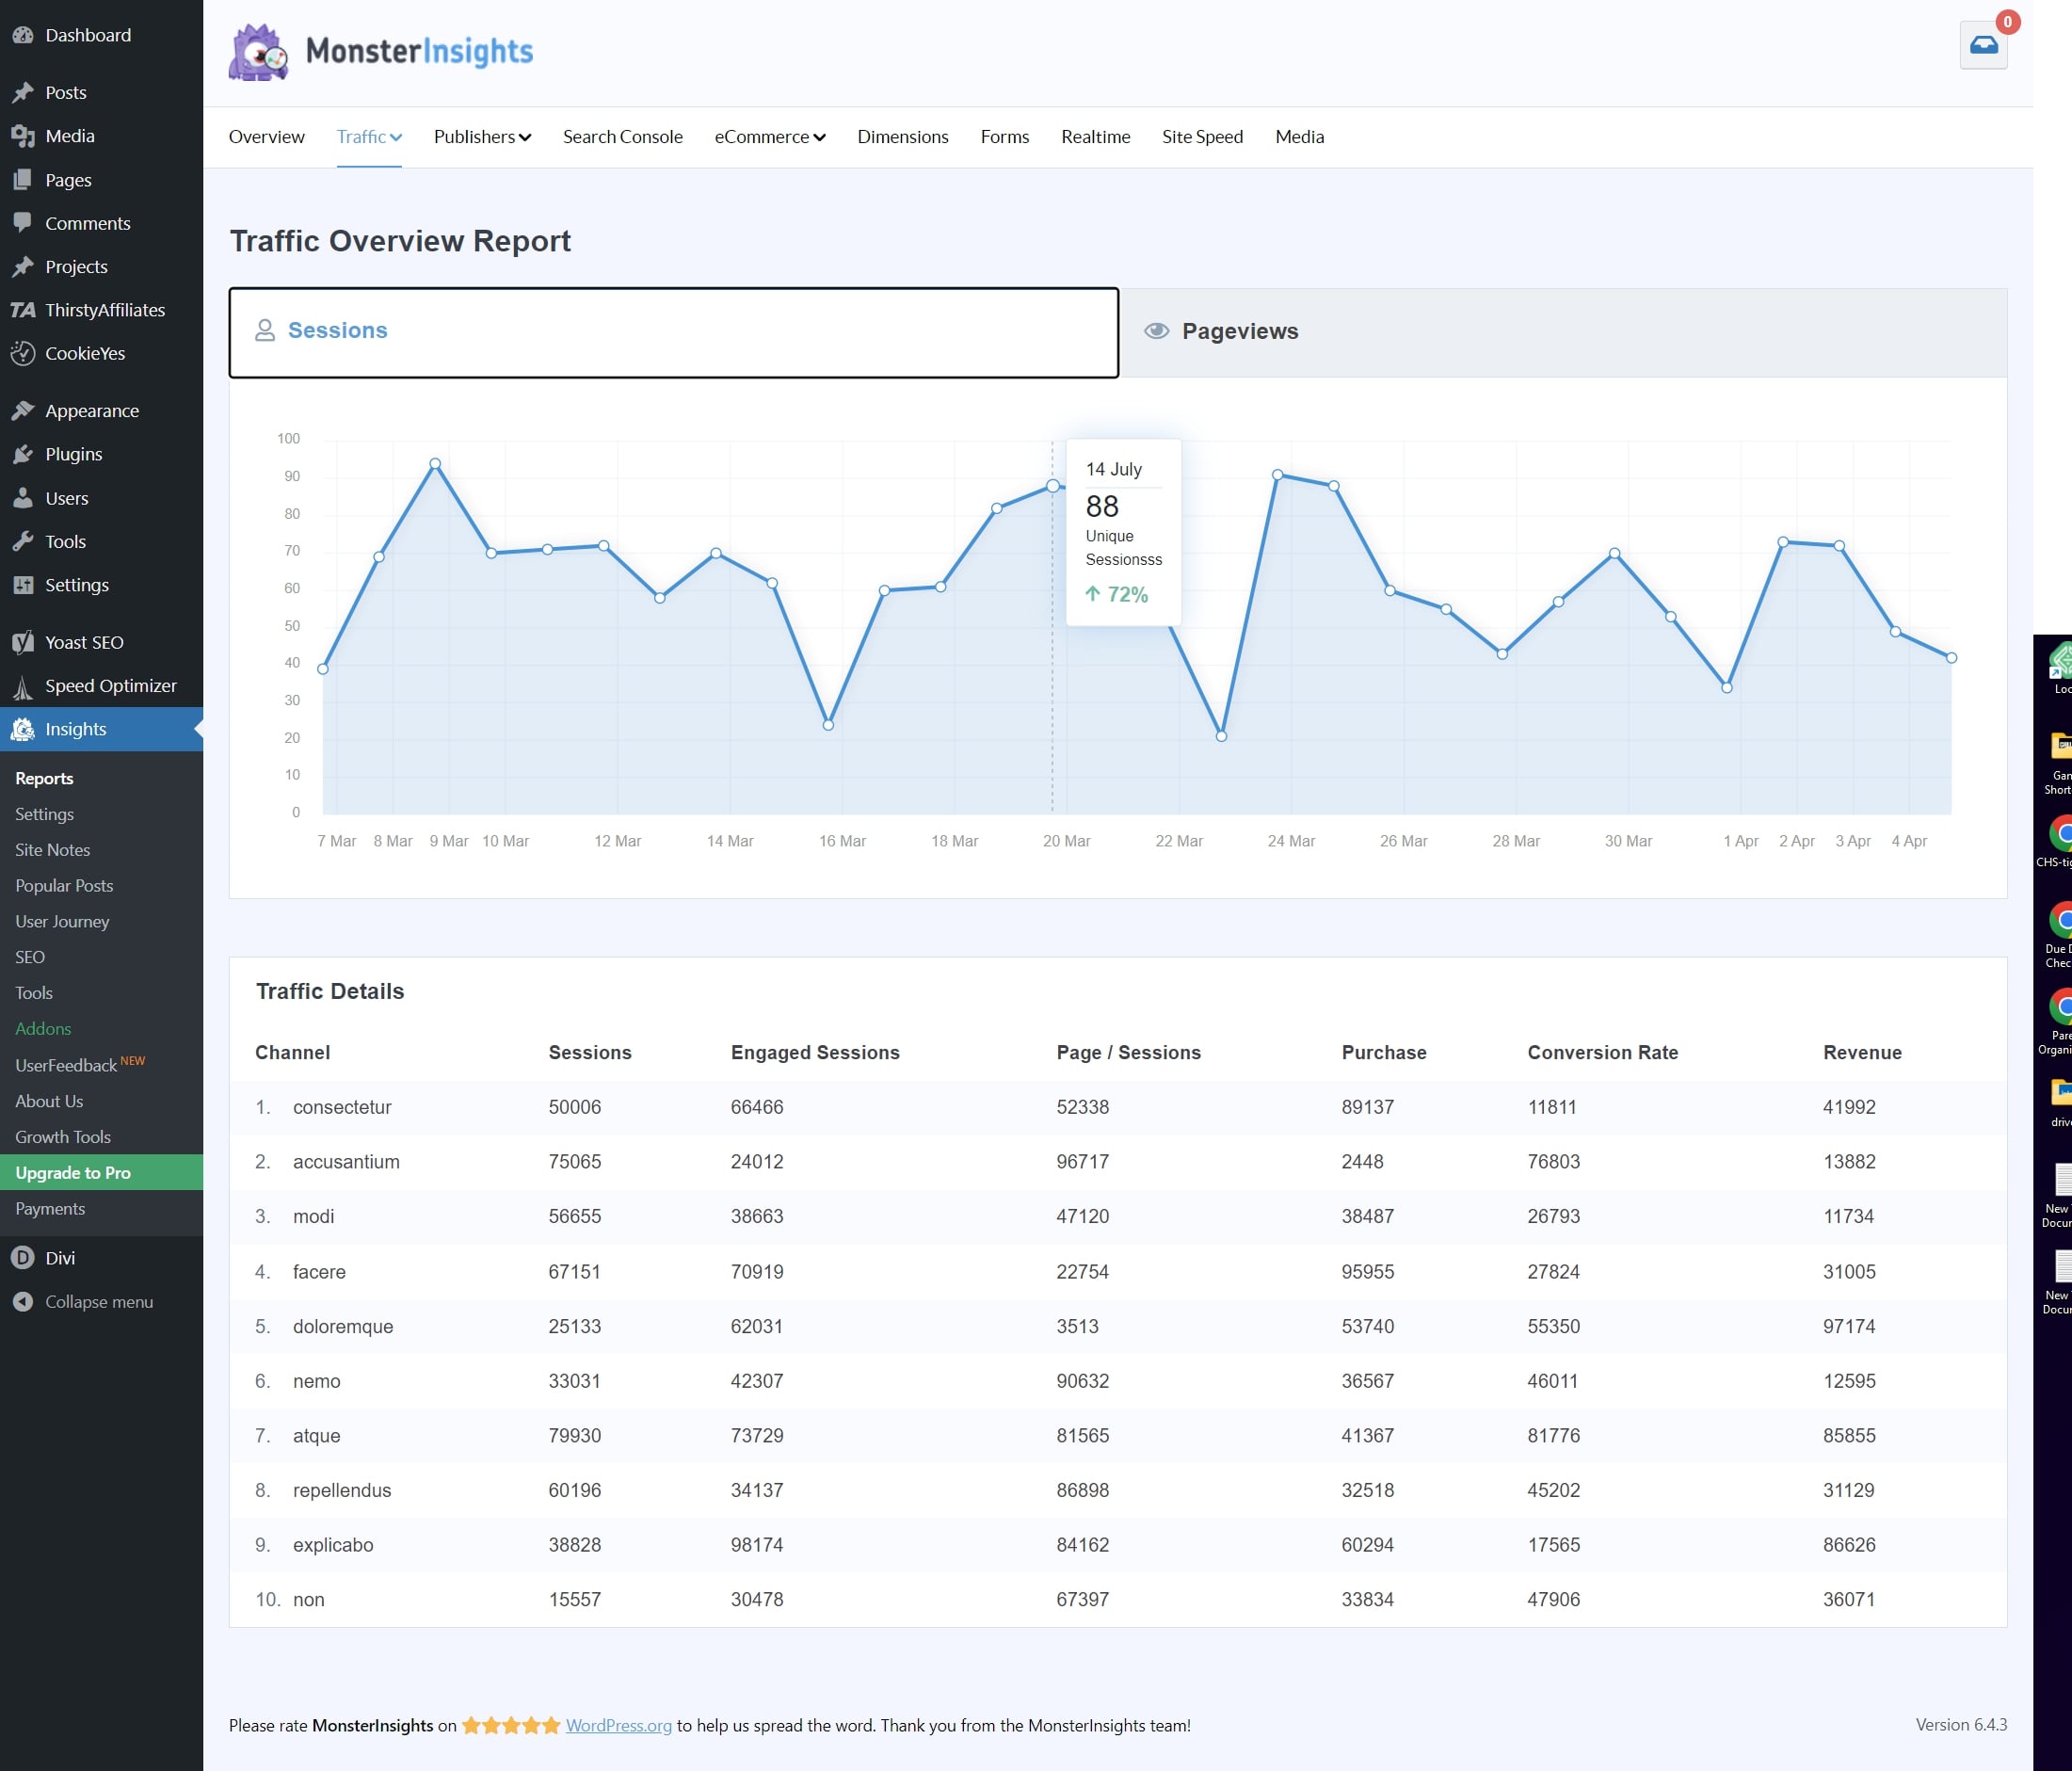 monsterinsights traffic overview report